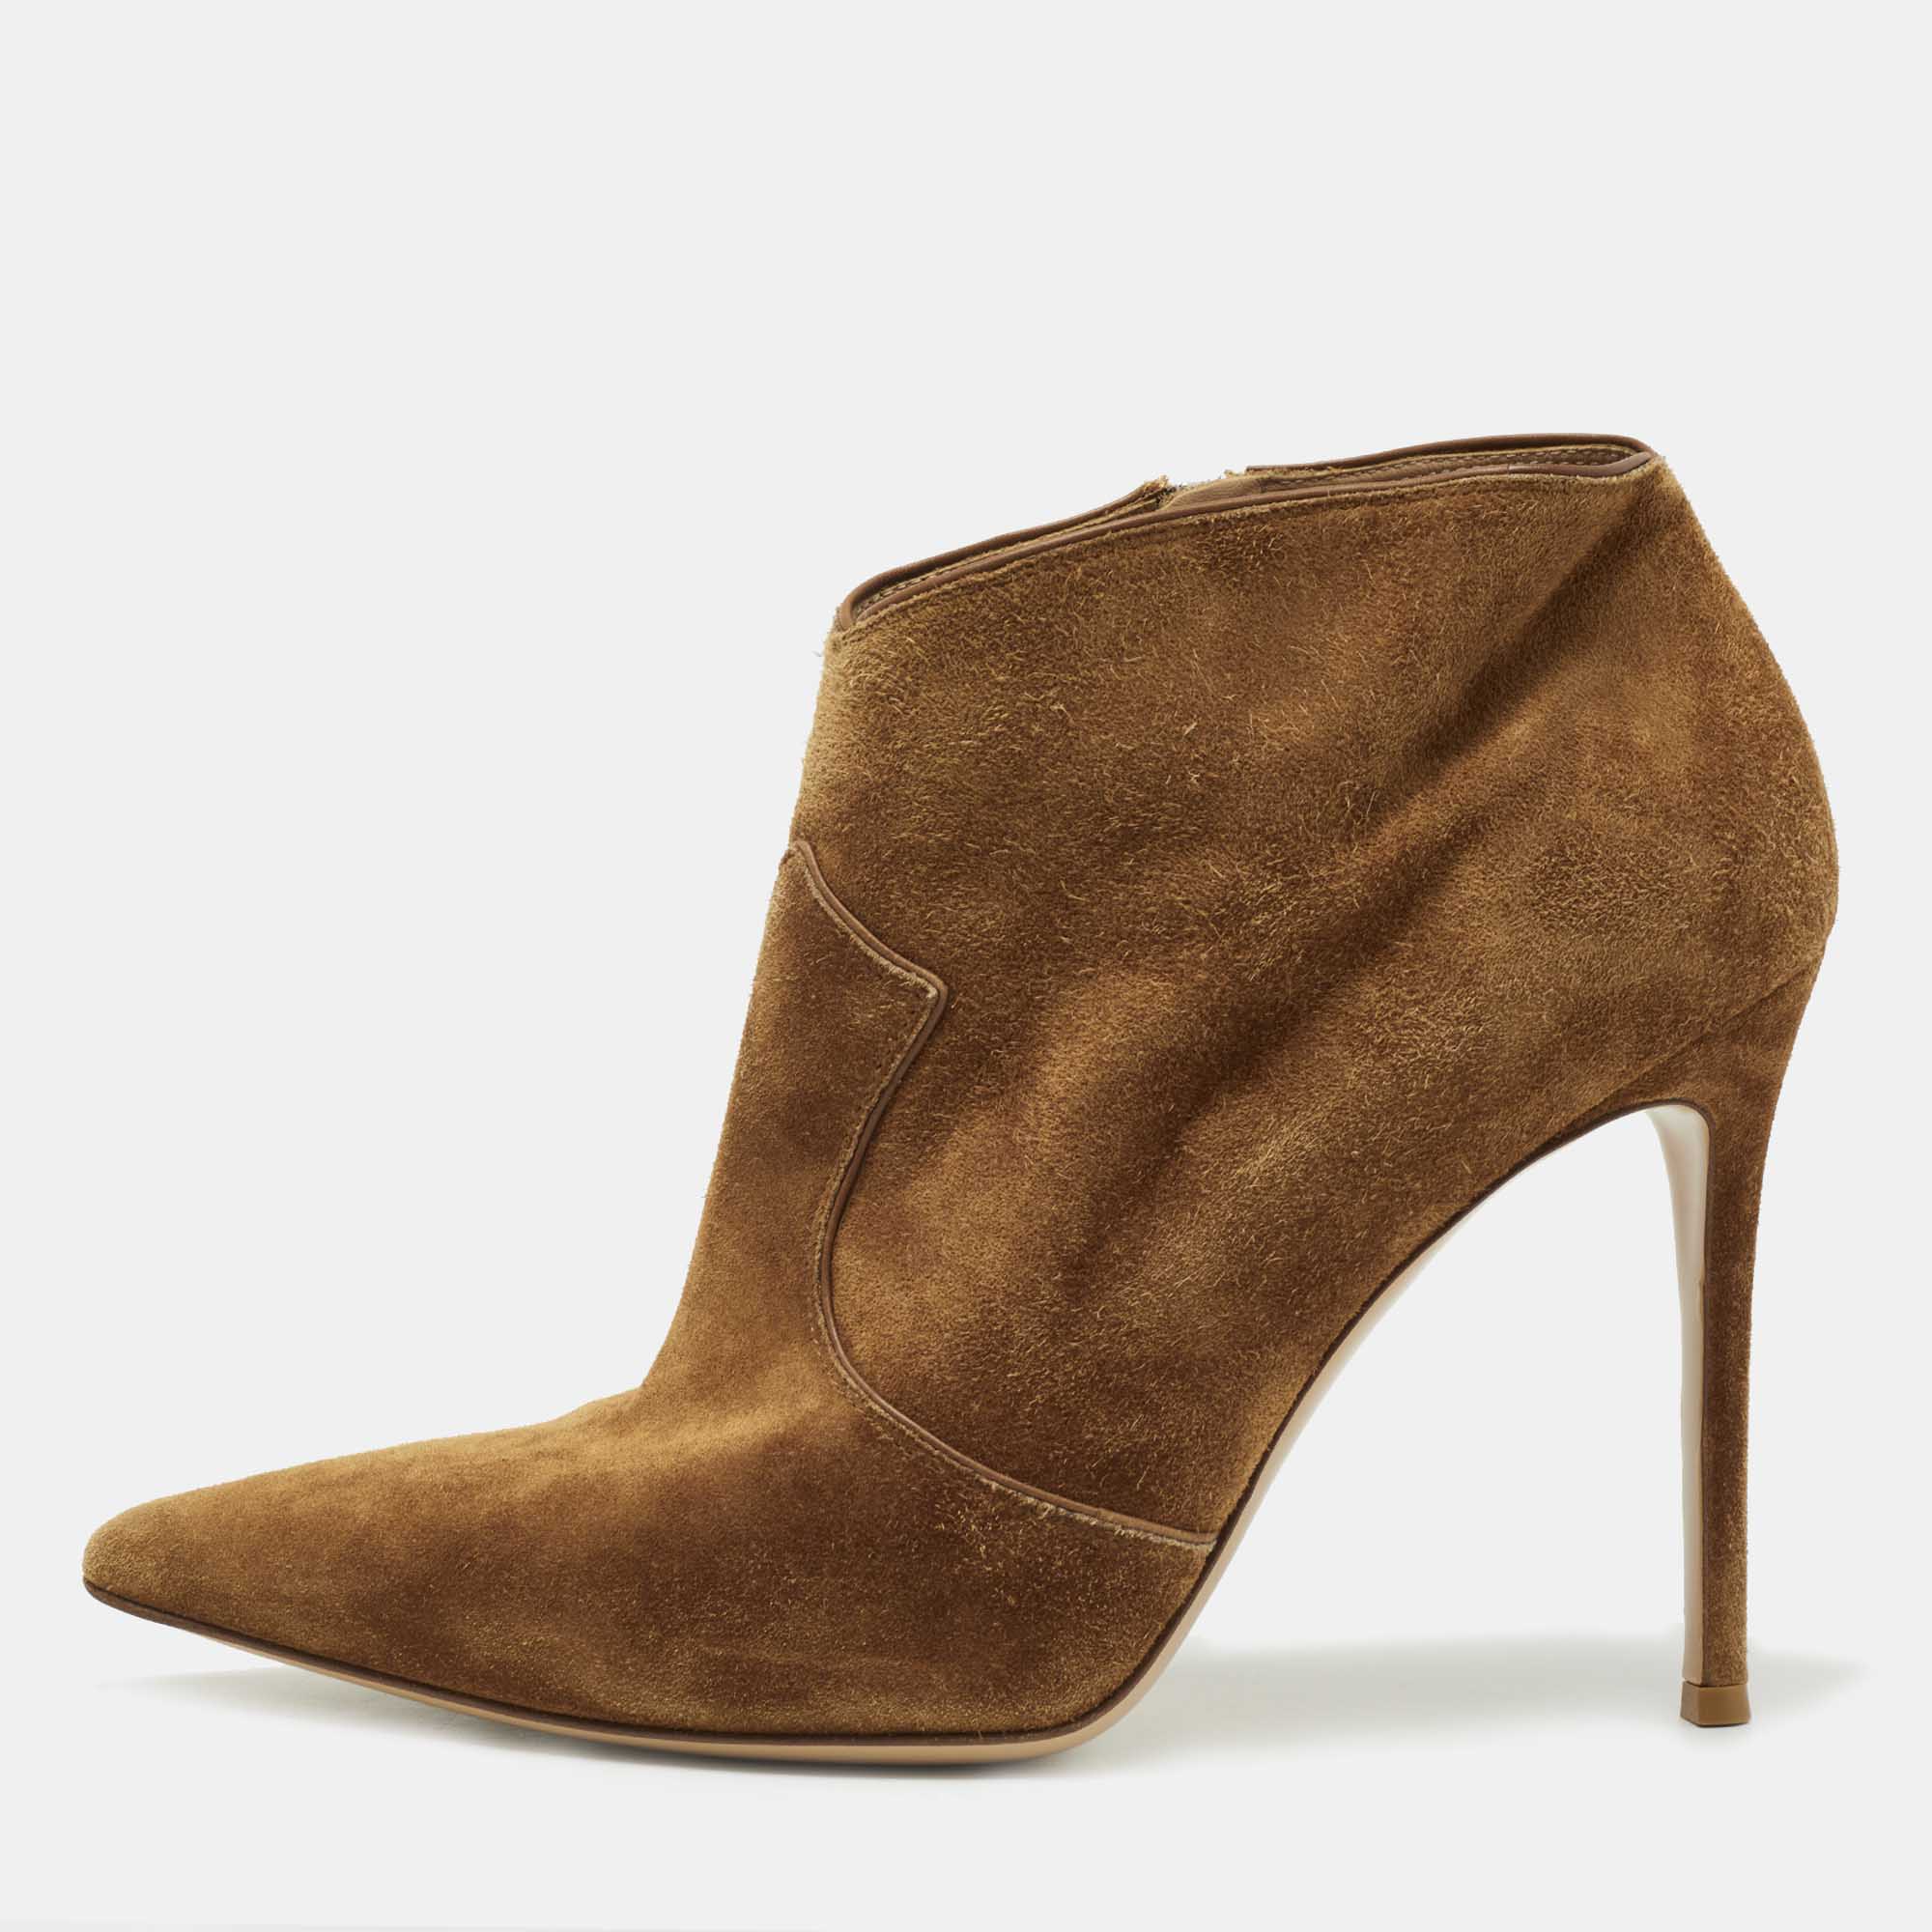 Gianvito Rossi Brown Suede Ankle Booties Size 41